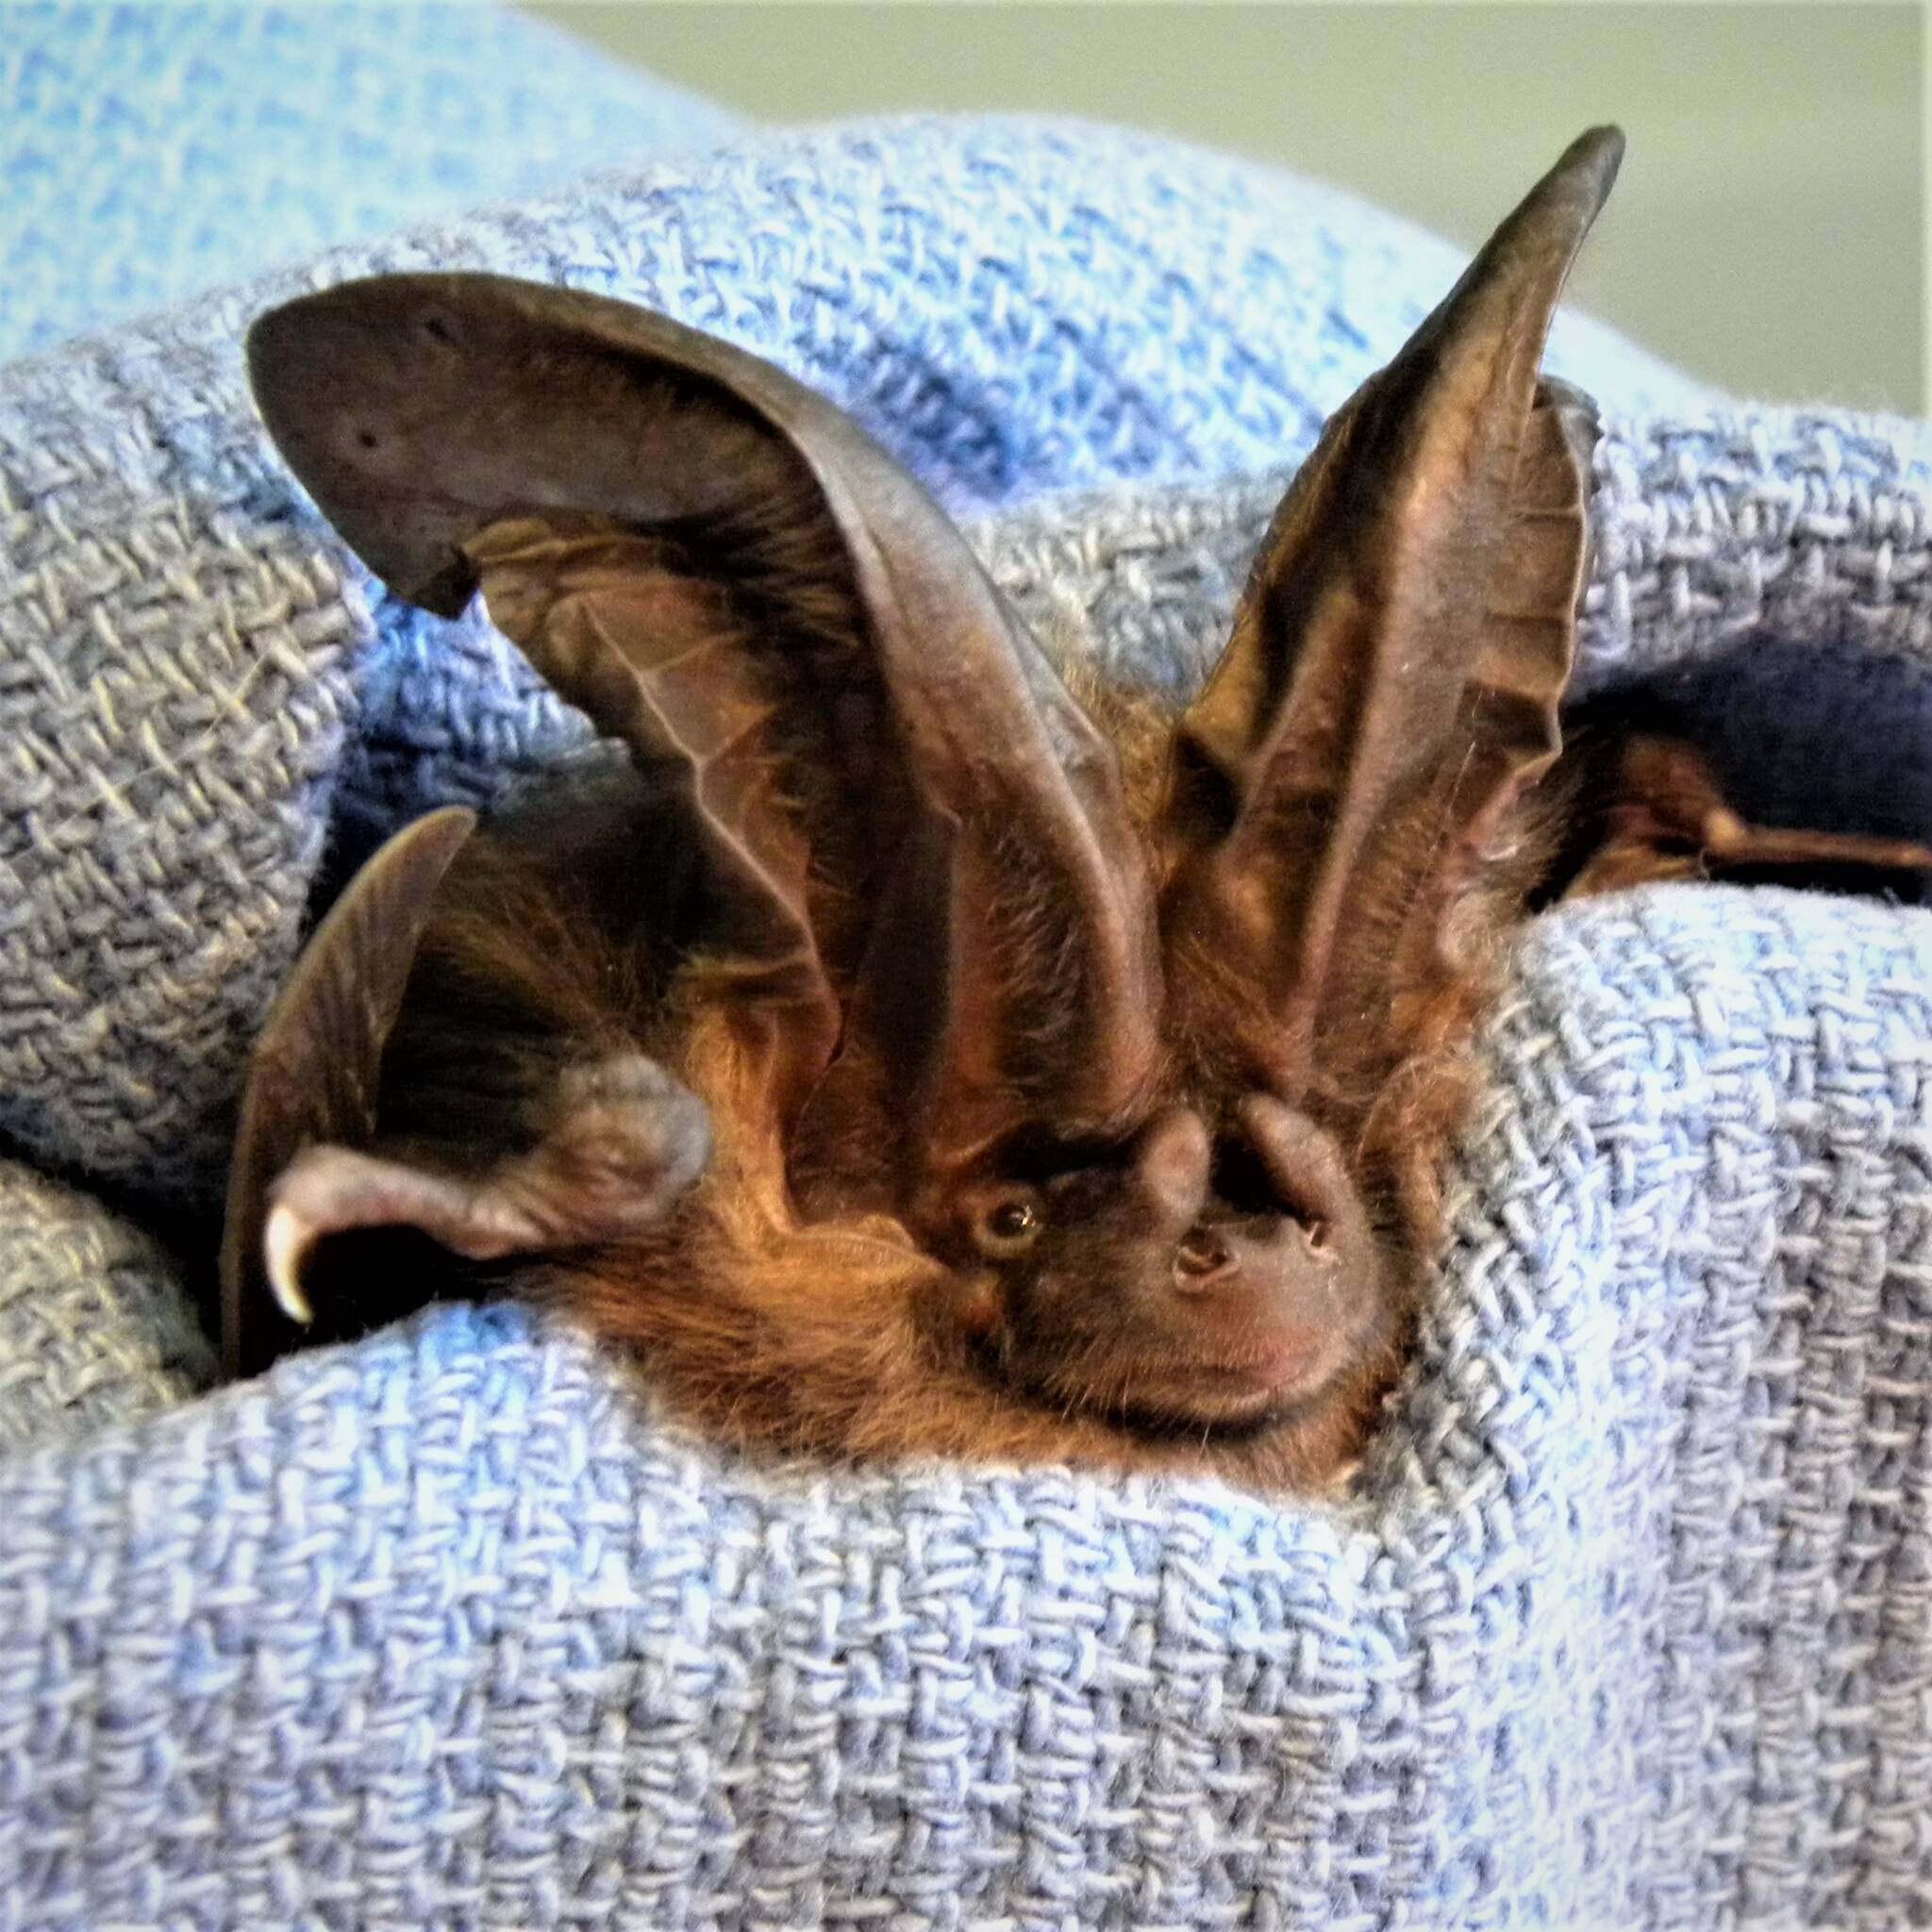 Contributed photo by Wolf Hollow Wildlife Rehabilitation Center
A Townsend’s Big-Eared Bat in Wolf Hollow's care.